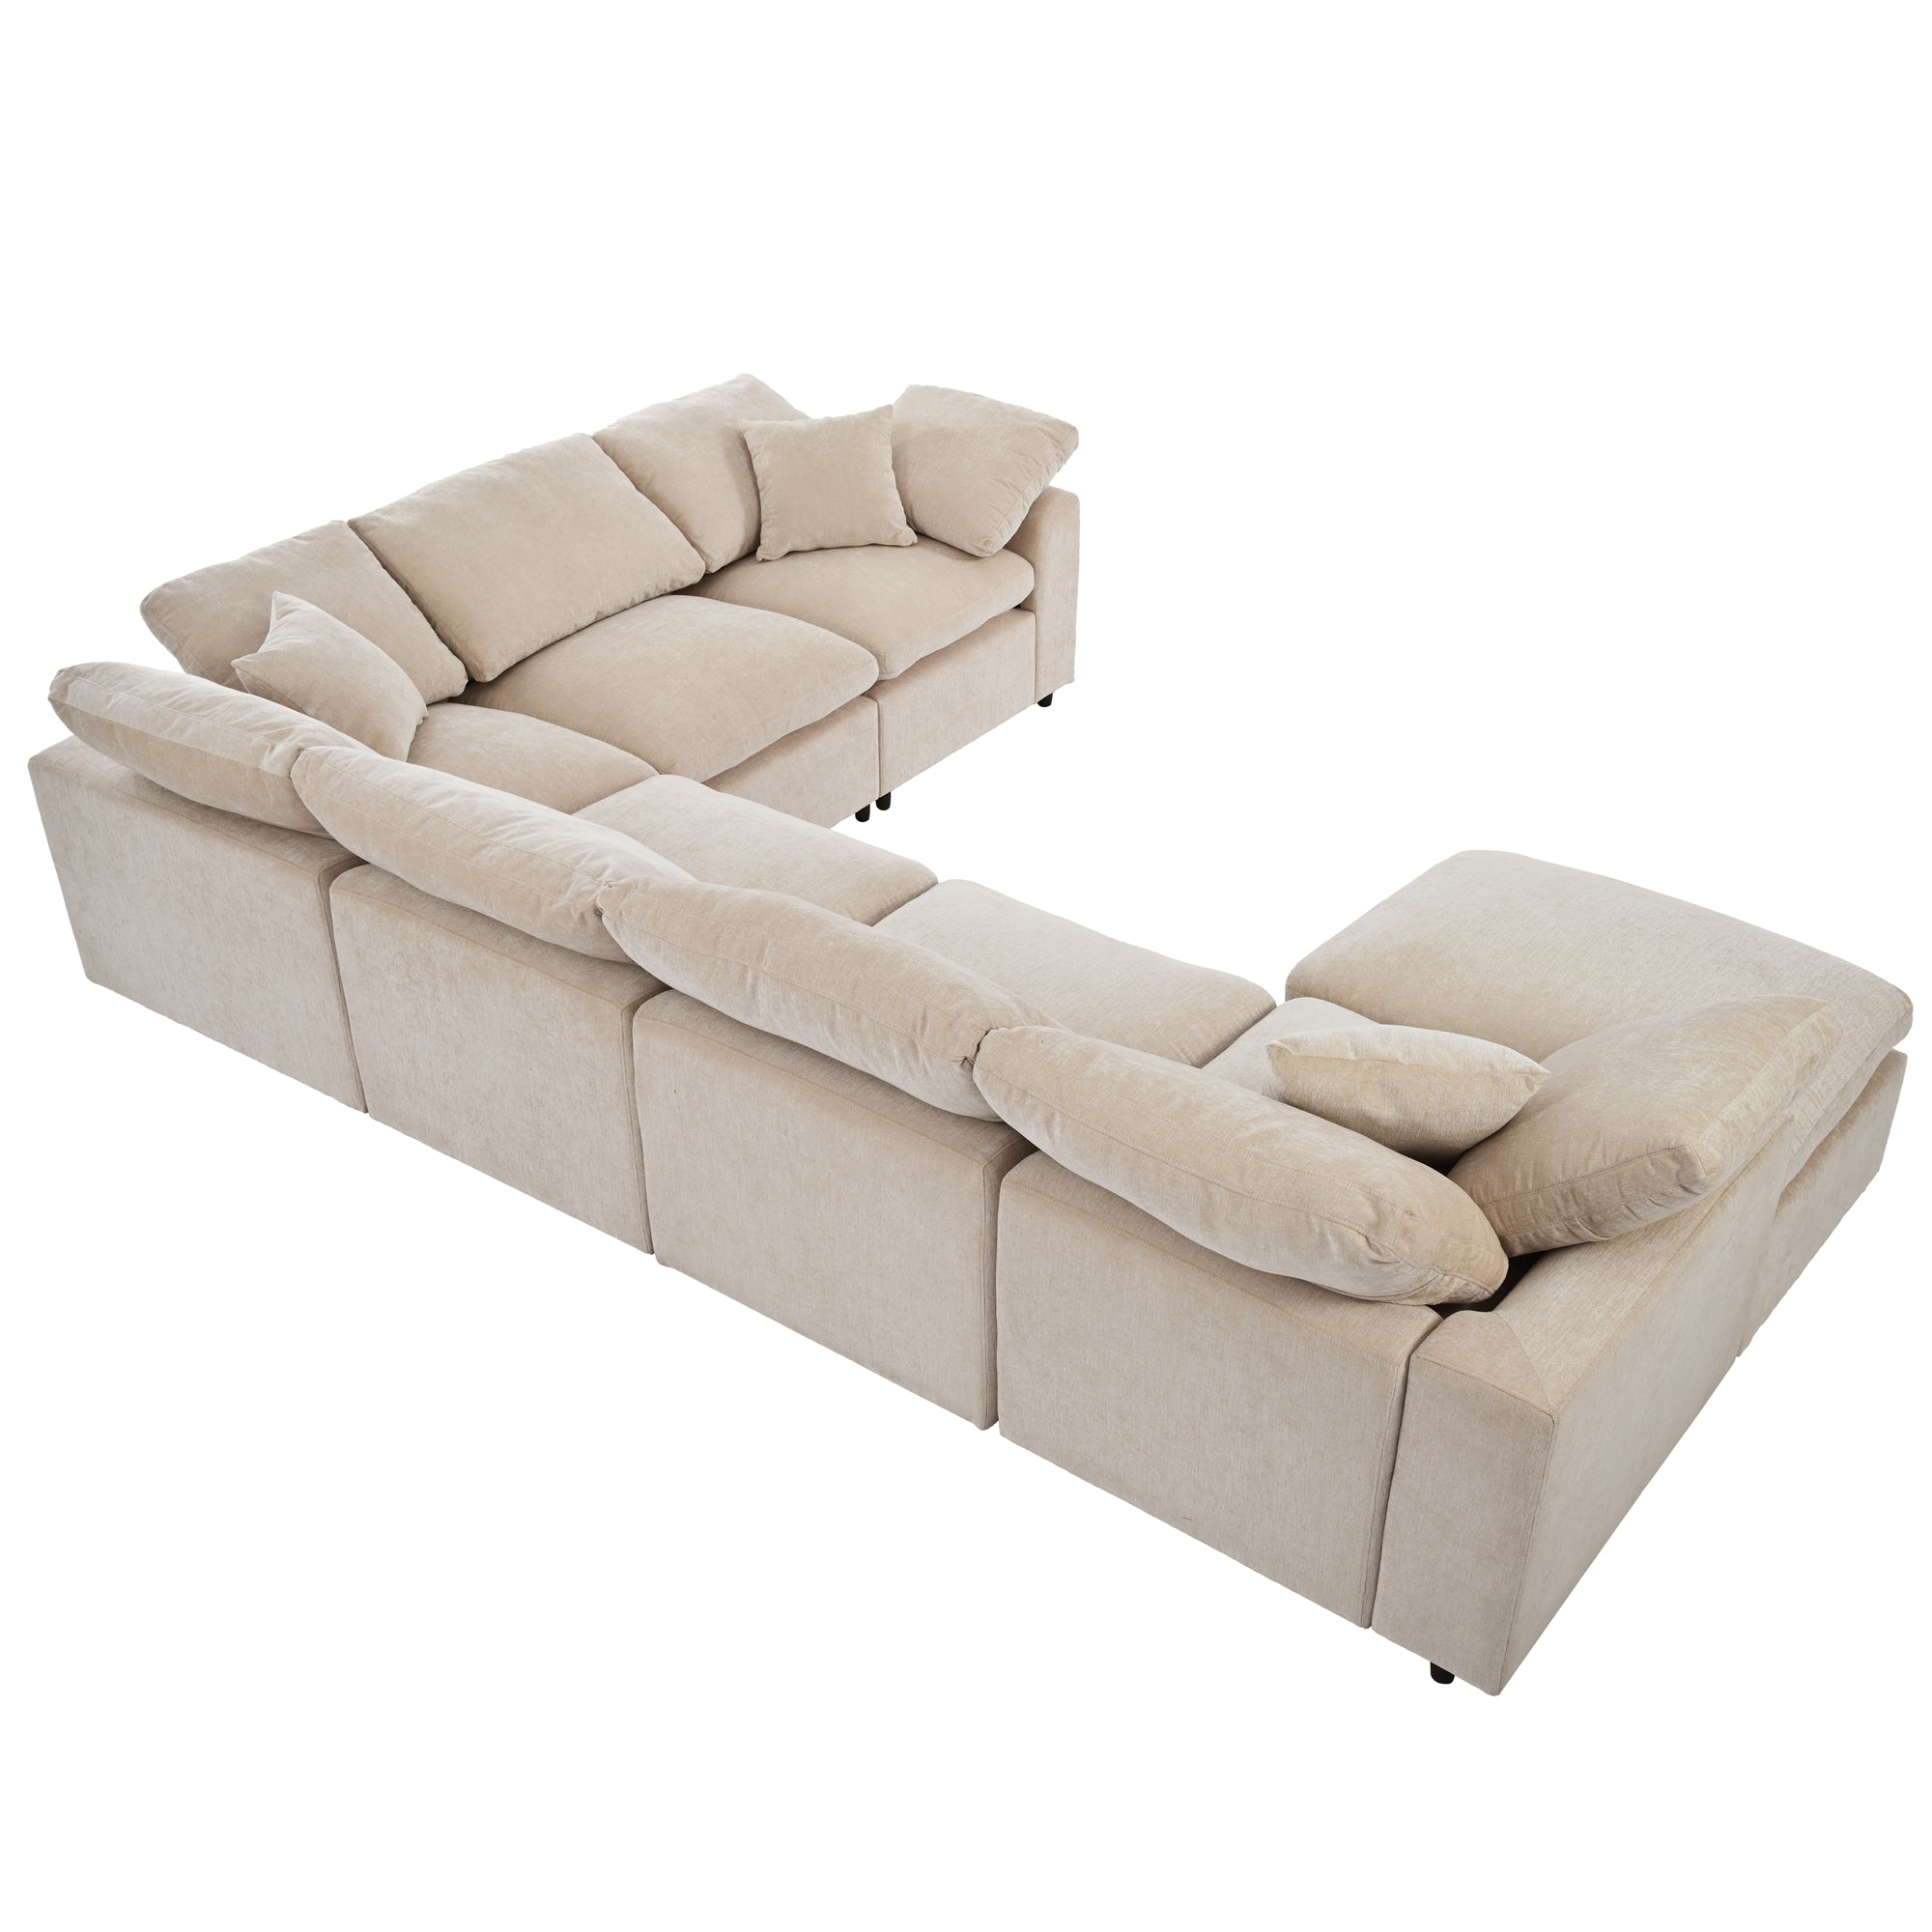 Bellemave 129.3" Oversized Modular Sectional Sofa with Ottoman L Shaped Corner Sectional